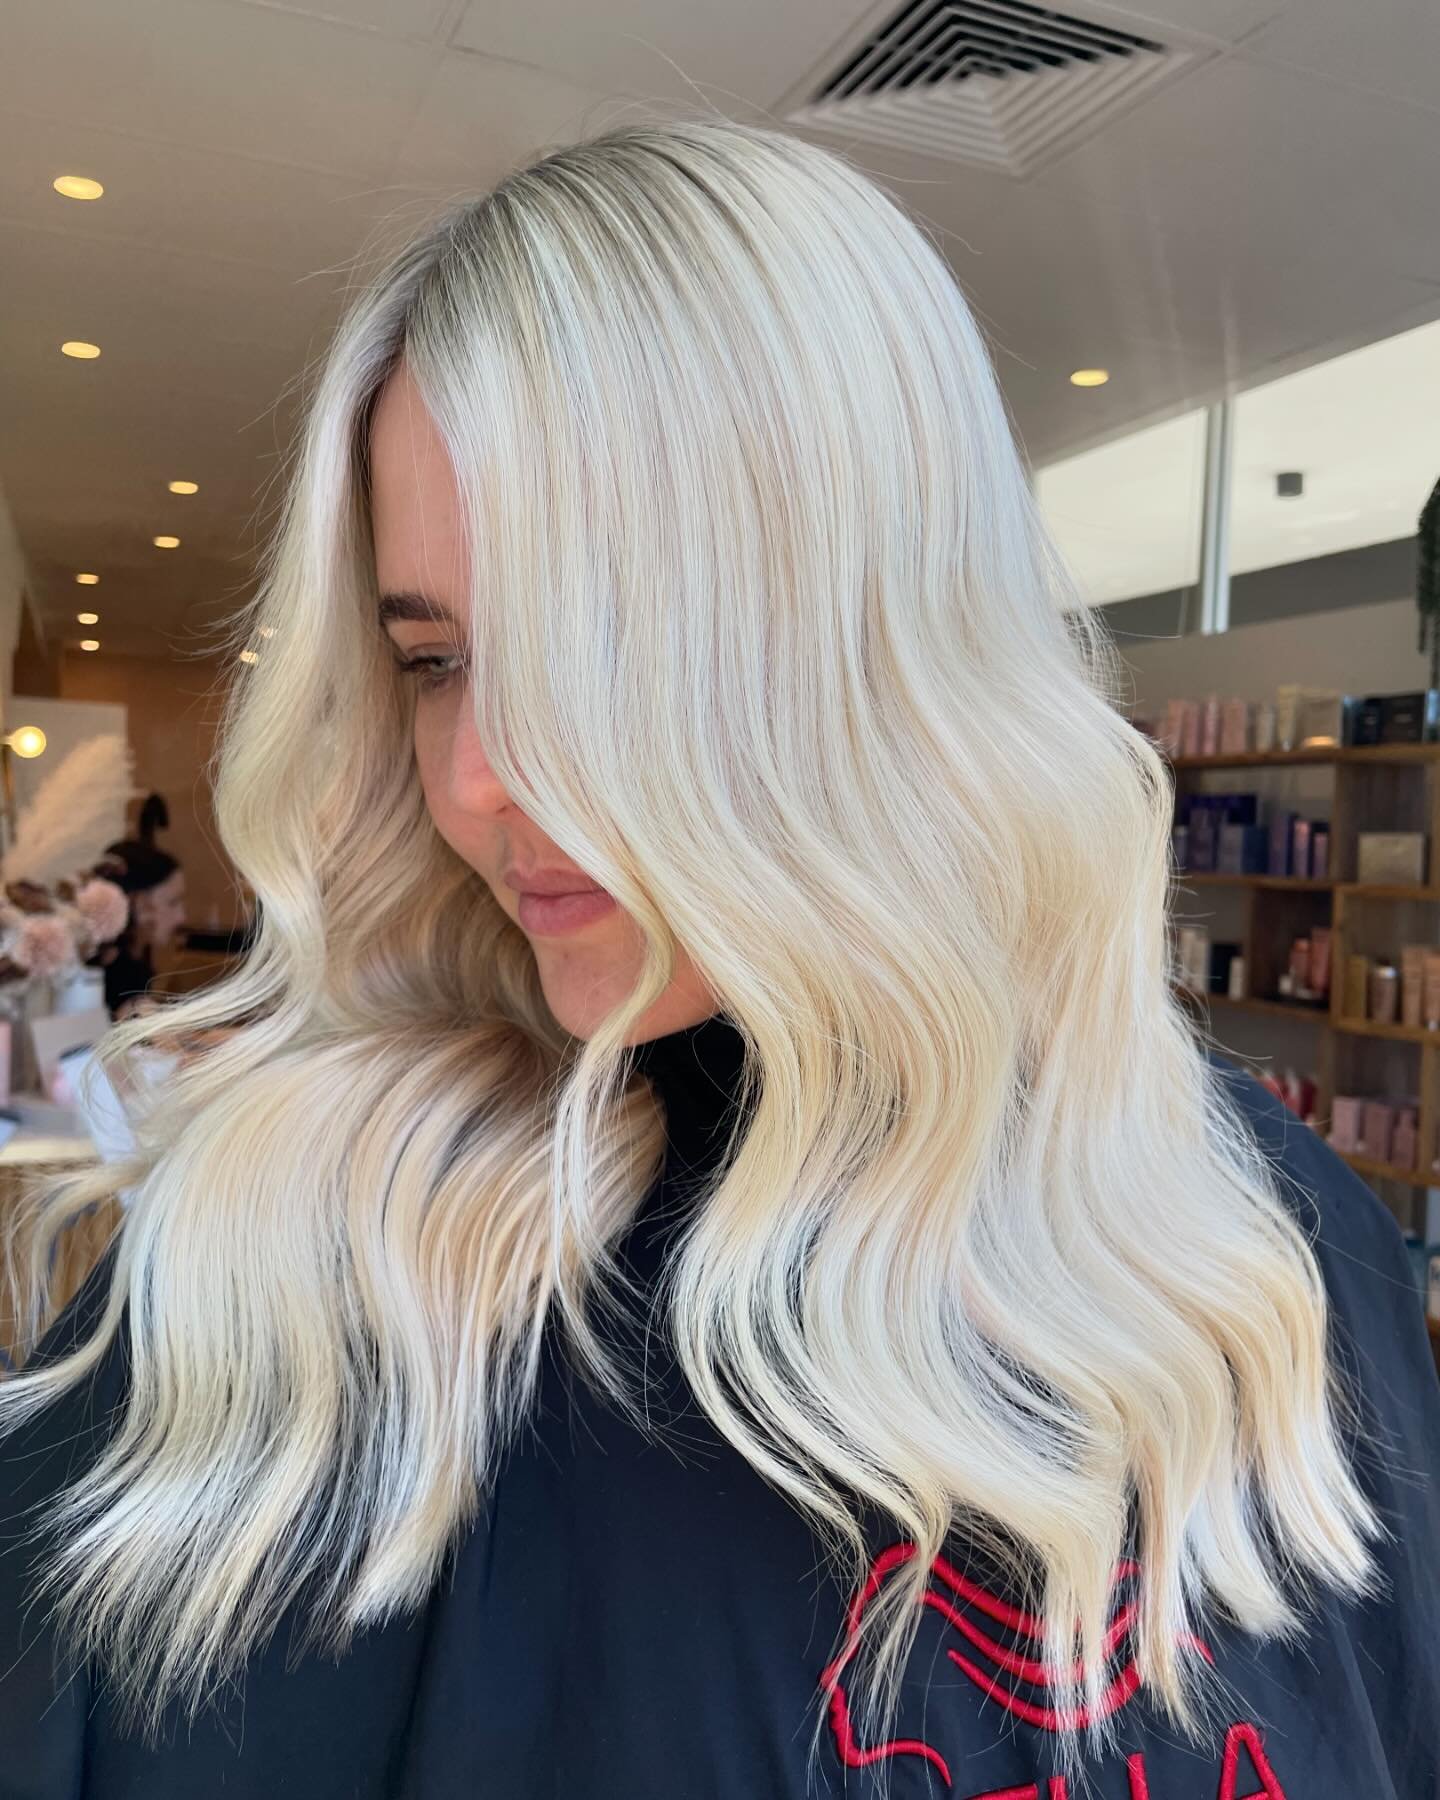 HOLLY&rsquo;S SIGNATURE 🌟We NEVER get sick of the bright, bright blondes @holly_blondee produces day after day 🤩💫

SWIPE ✨ For some of @holly_blondee&rsquo;s recent dazzling blondes. 

#blondee #brisbaneblondespecialist #brightblonde #newstead #mo